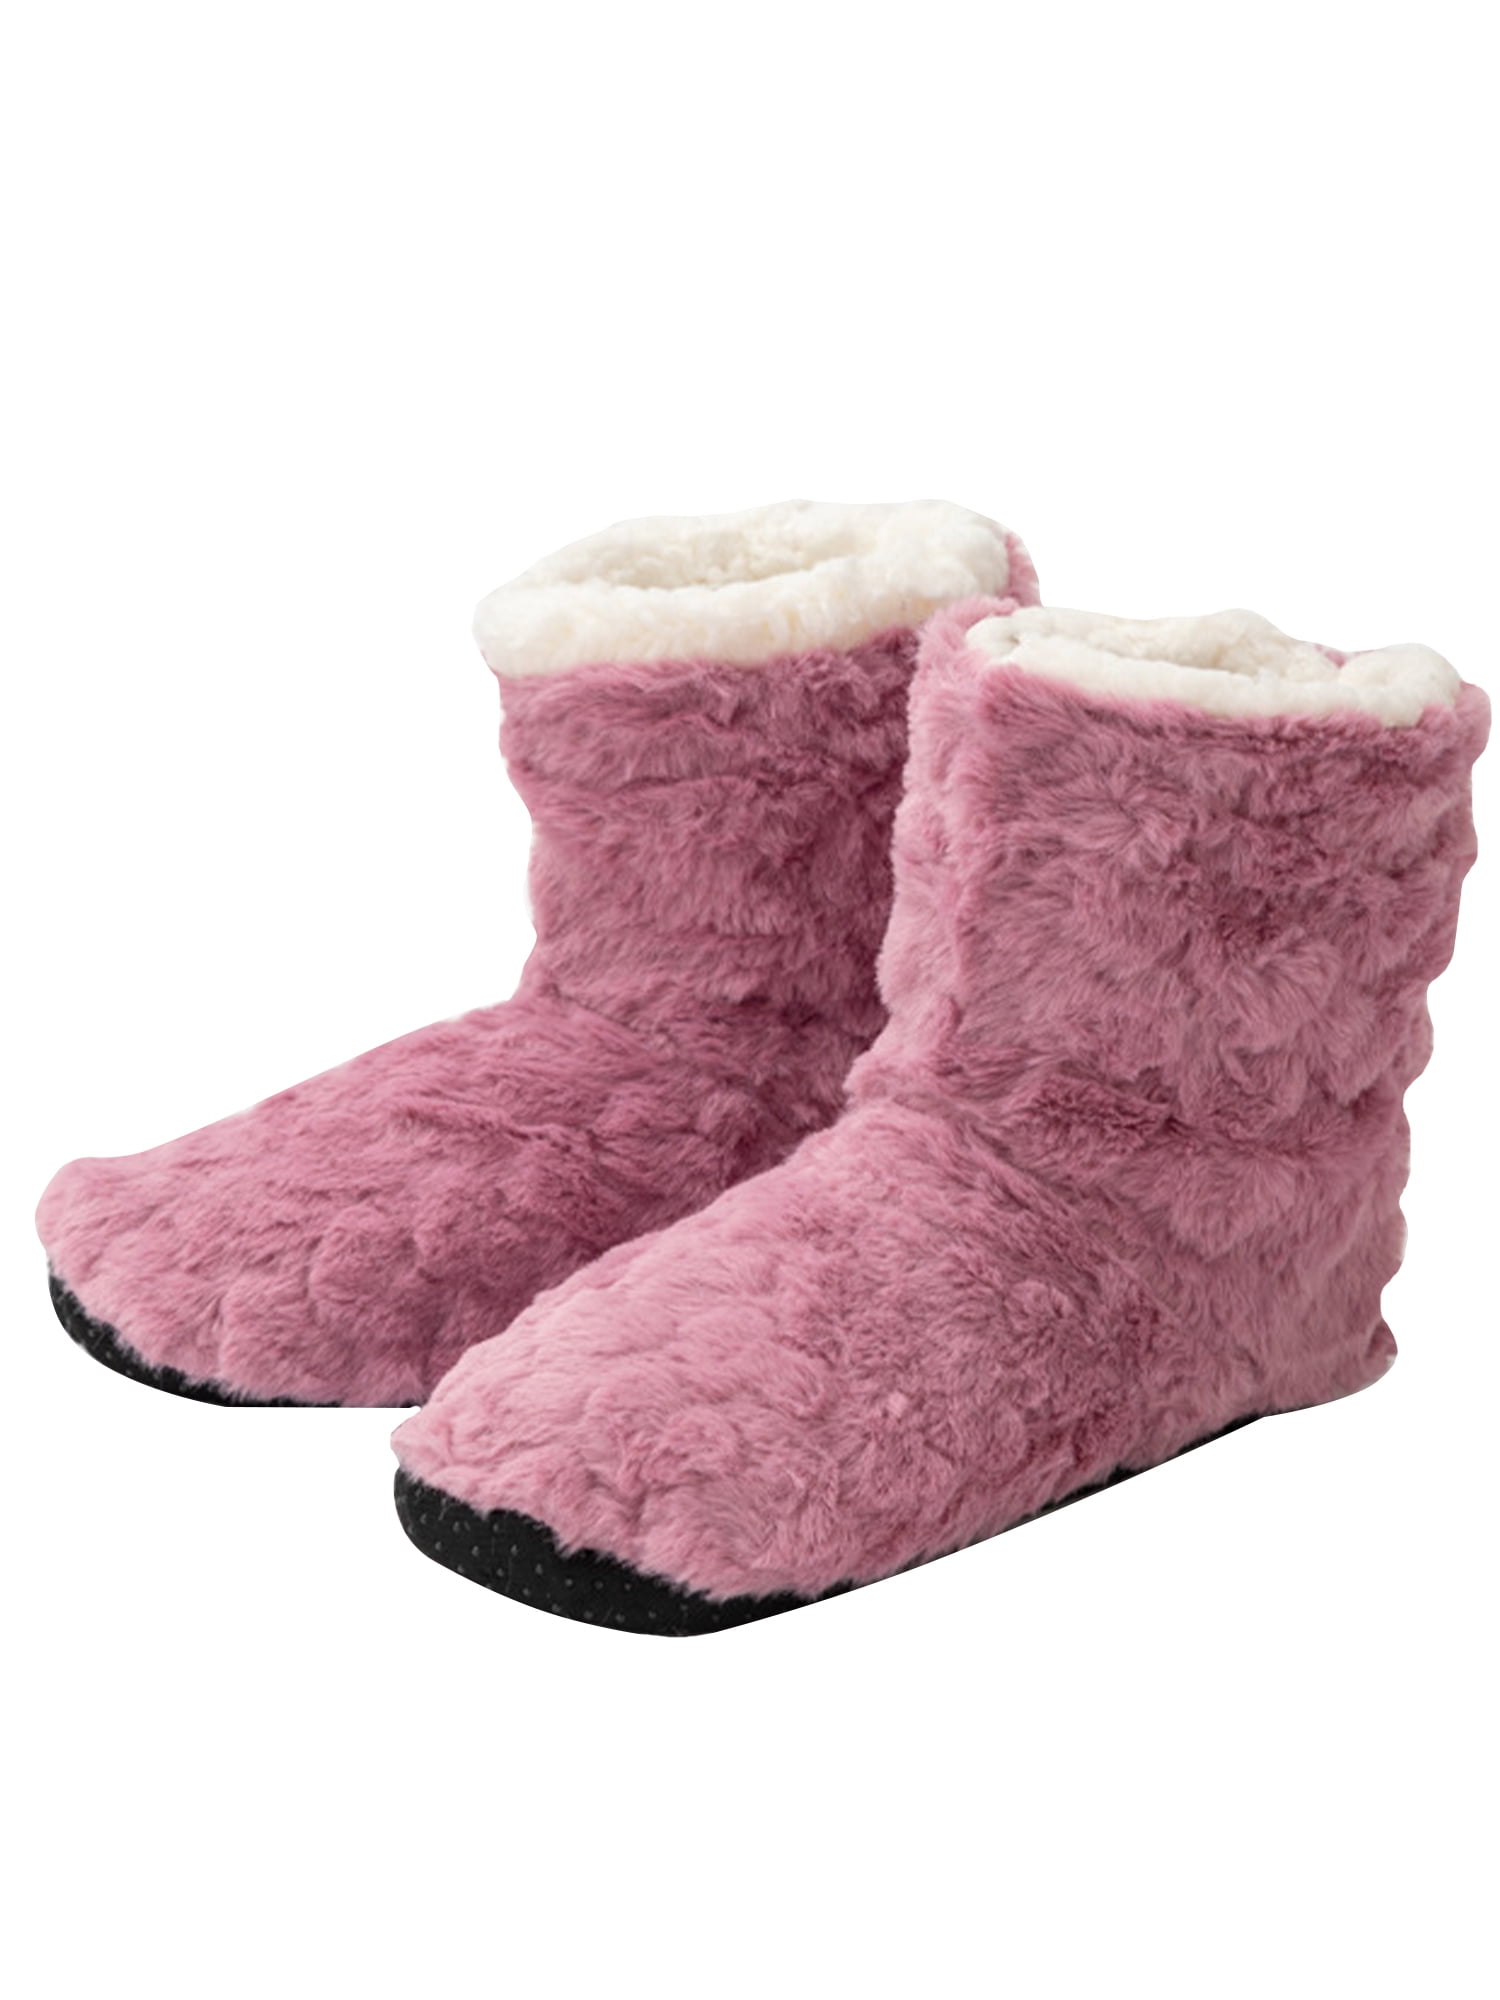 ***SALE***Duvet Ducks Feather filled Bootie Slippers Choc and Pink Winter 